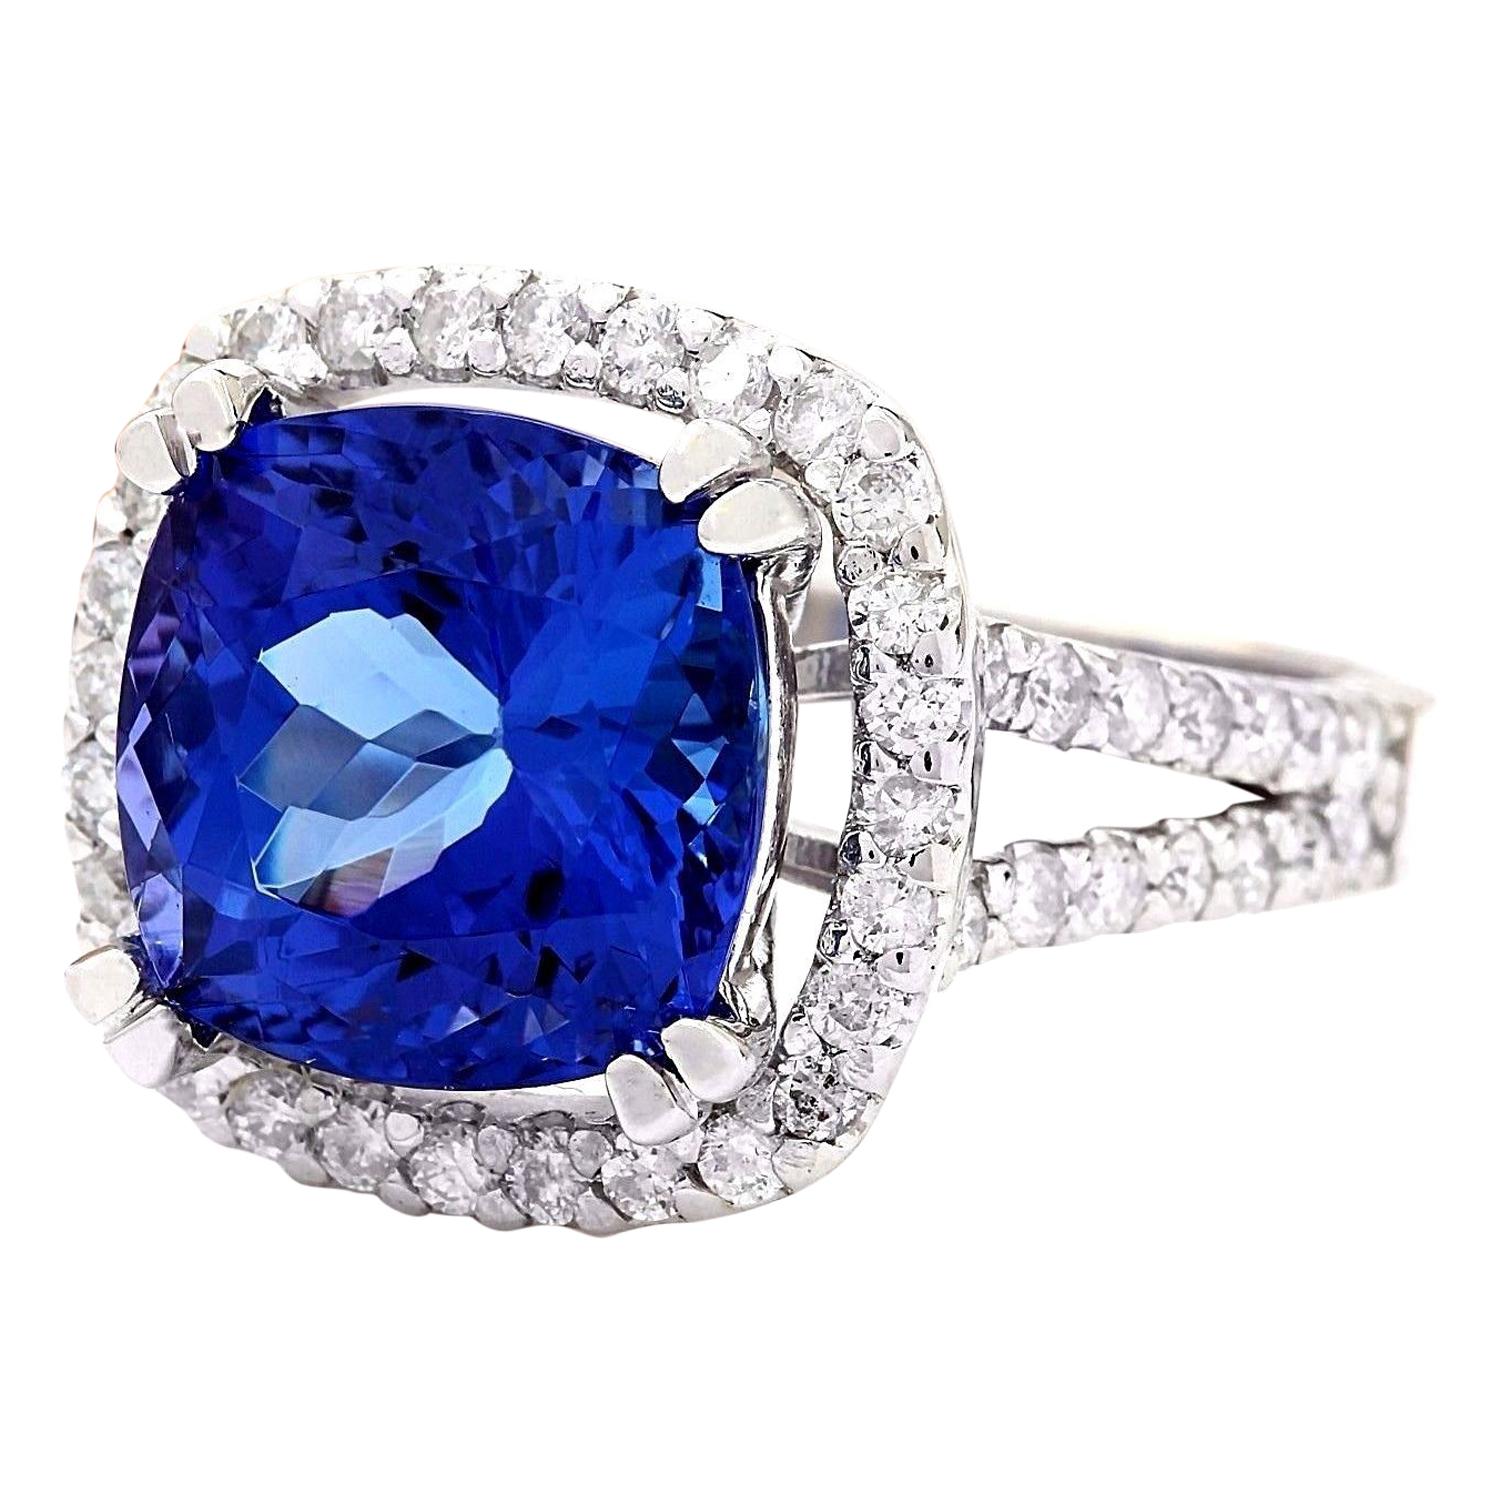 6.60 Carat  Tanzanite 14K Solid White Gold Diamond Ring
Item Type: Ring
Item Style: Cocktail
Material: 14K White Gold
Mainstone: Tanzanite
Stone Color: Blue
Stone Weight: 5.70 Carat
Stone Shape: Cushion
Stone Quantity: 1
Stone Dimensions: